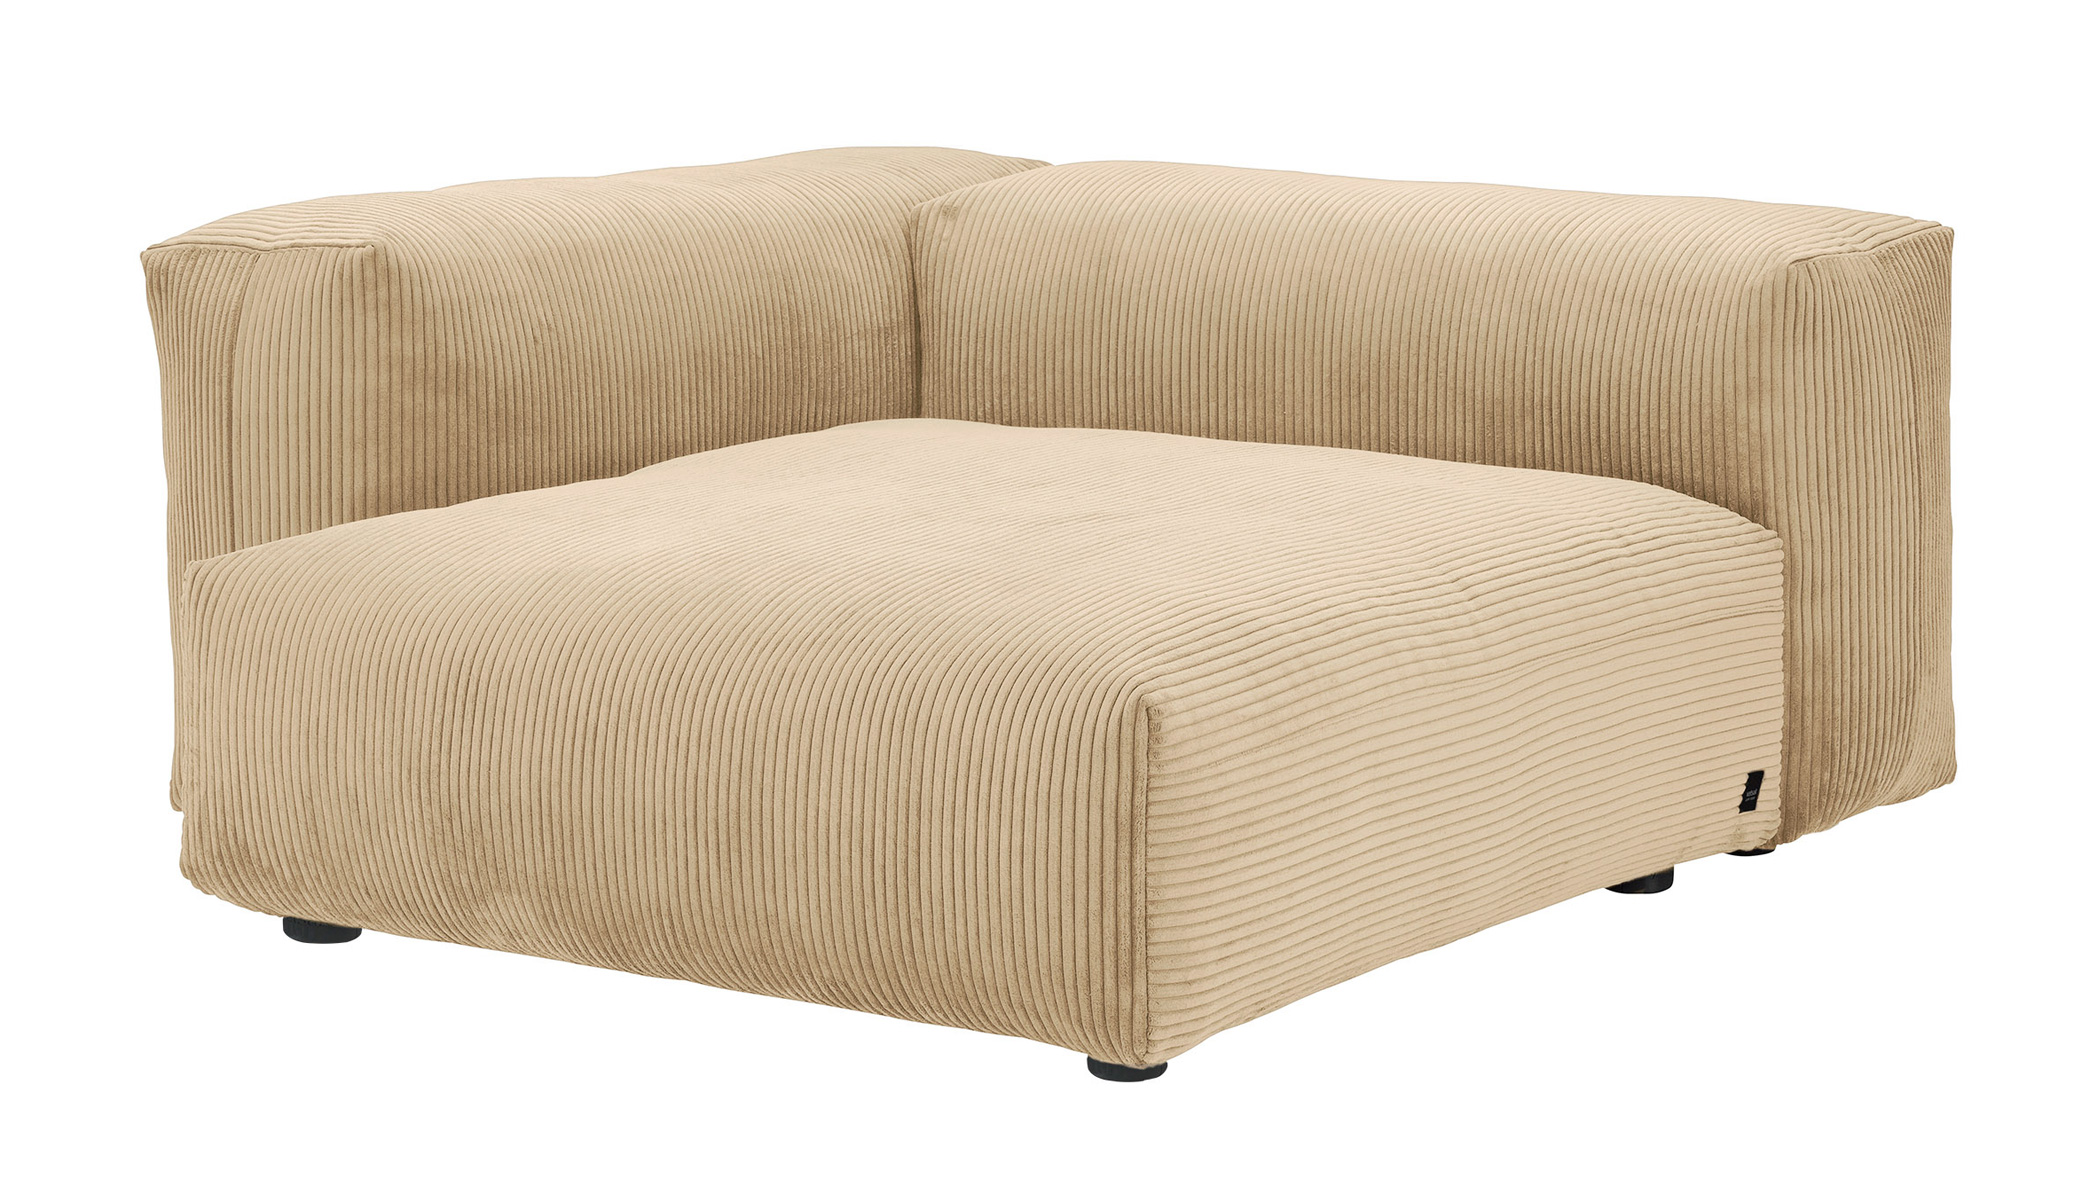  Sofa 1 Large 2 Side Cord Velours sand